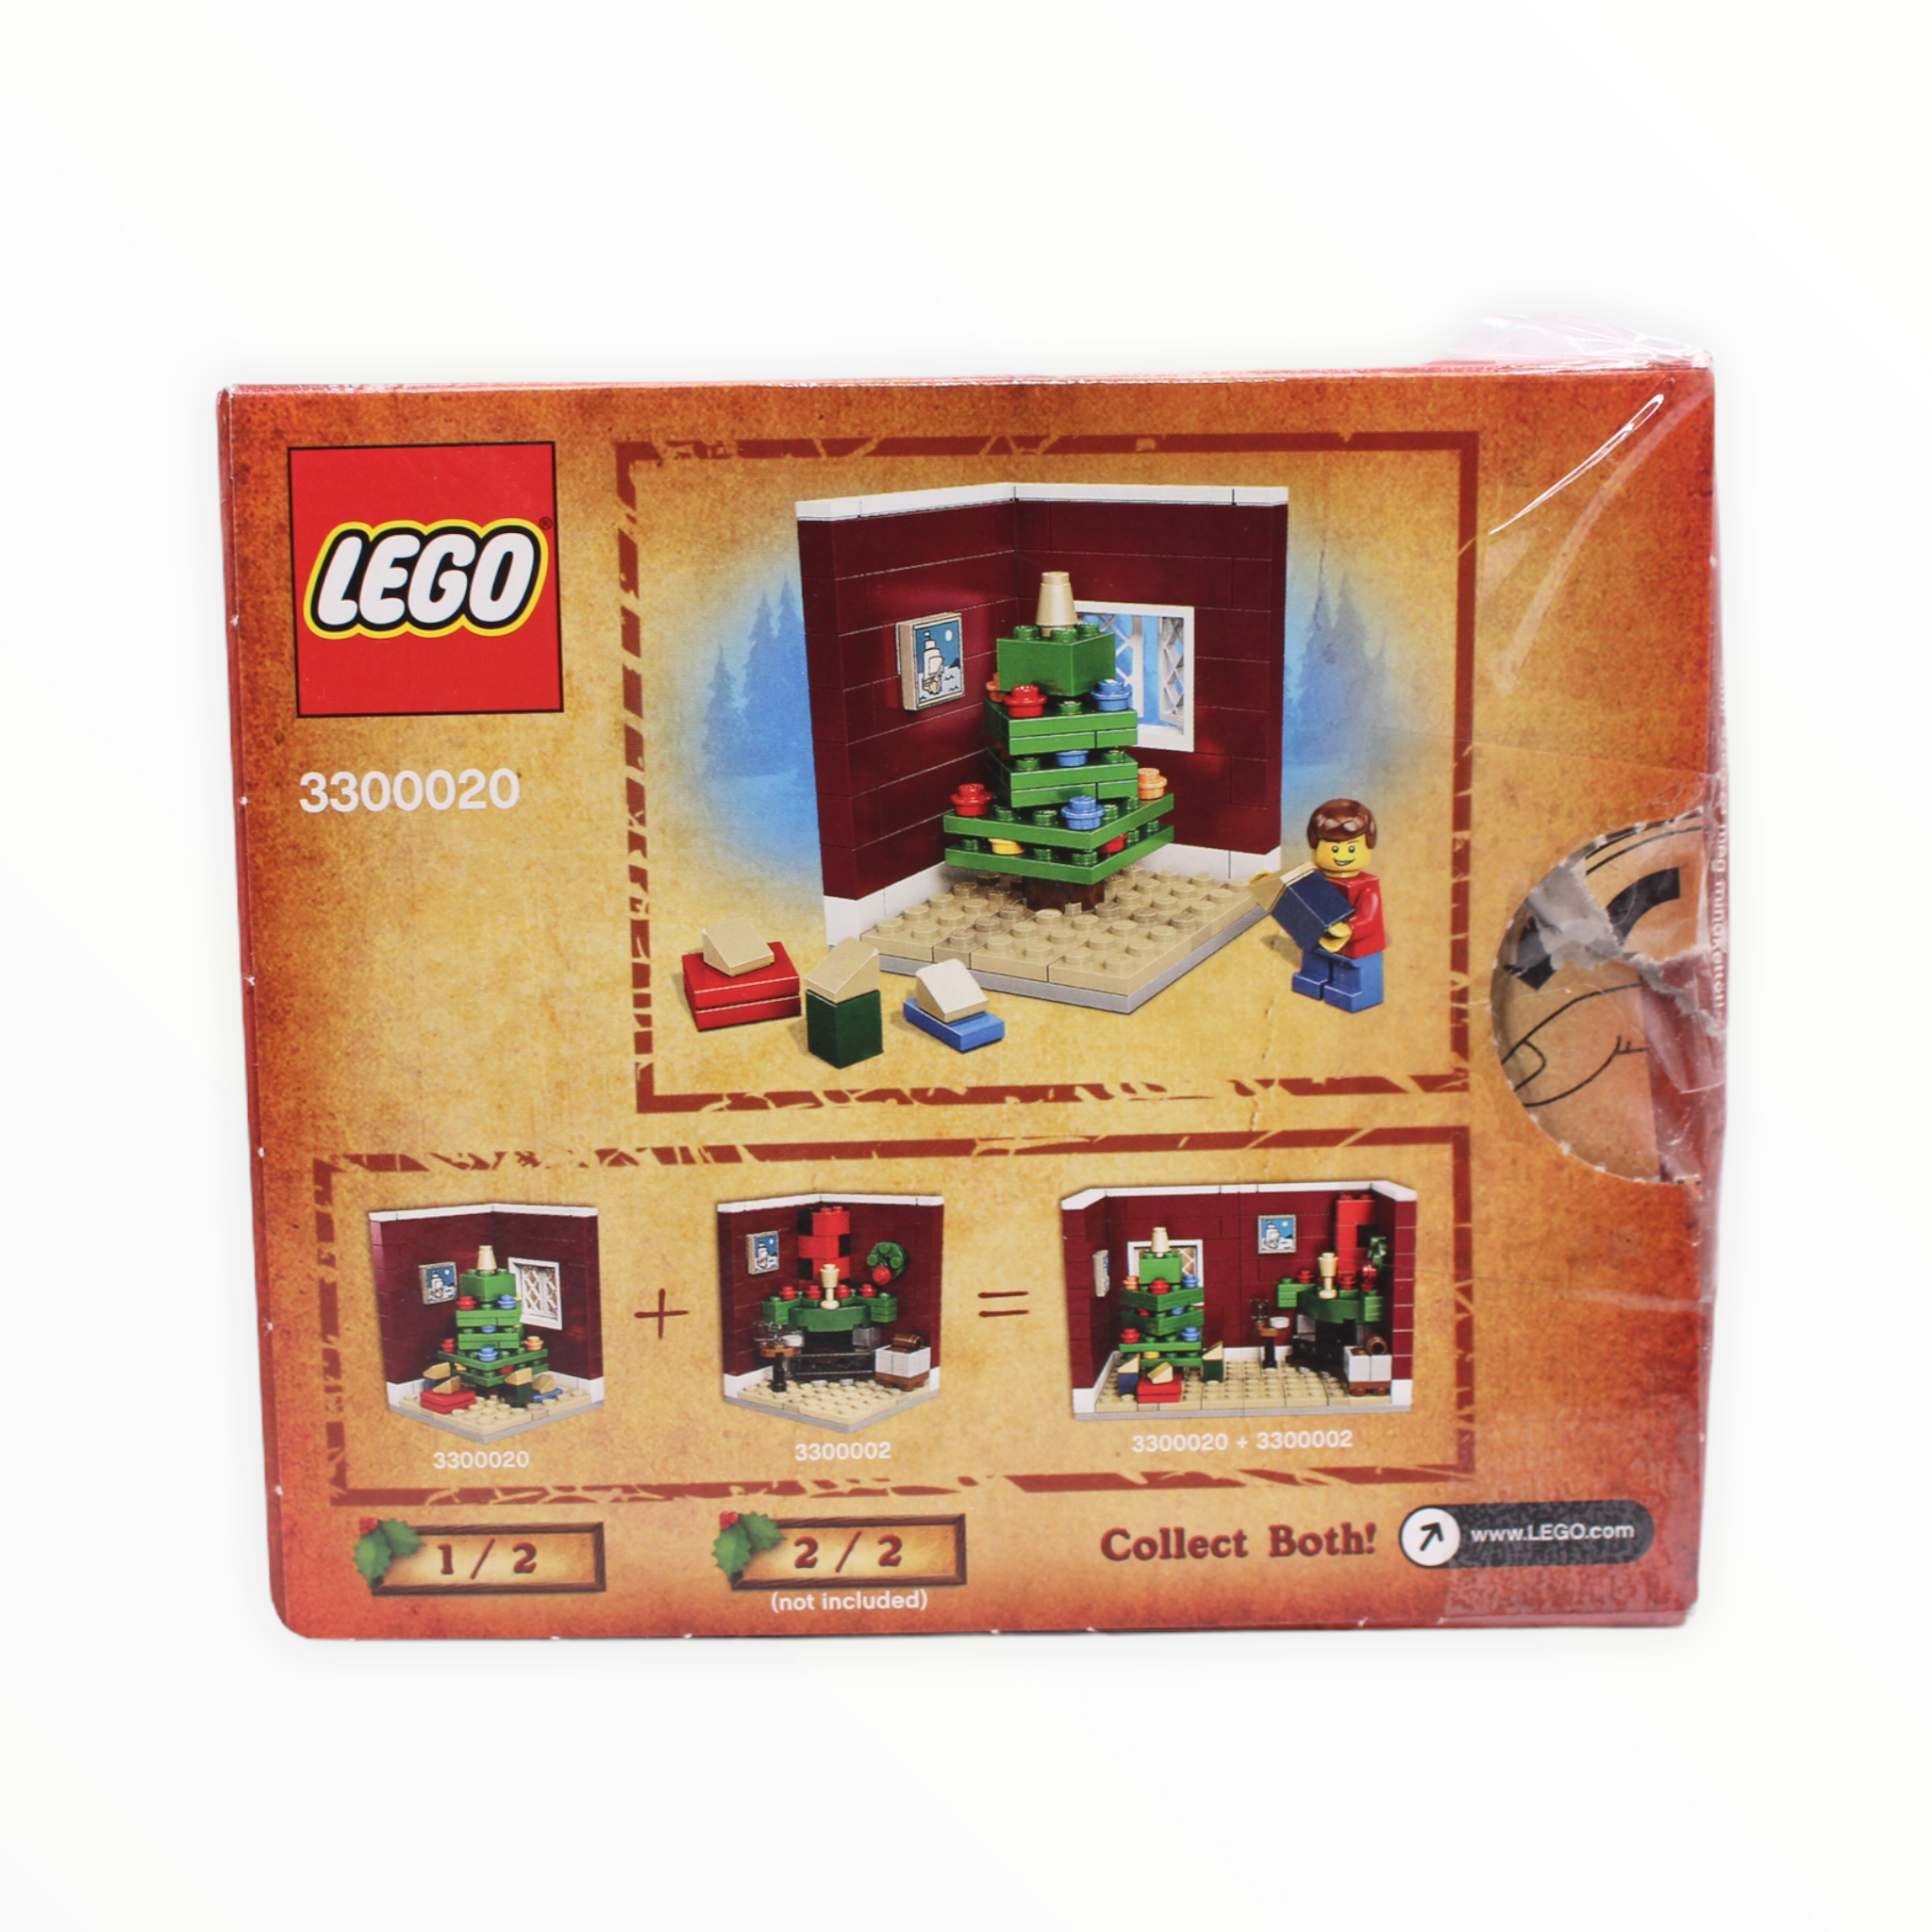 Certified Used Set 3300020 LEGO Christmas Tree Scene - Limited Edition 2011 Holiday Set (1 of 2)